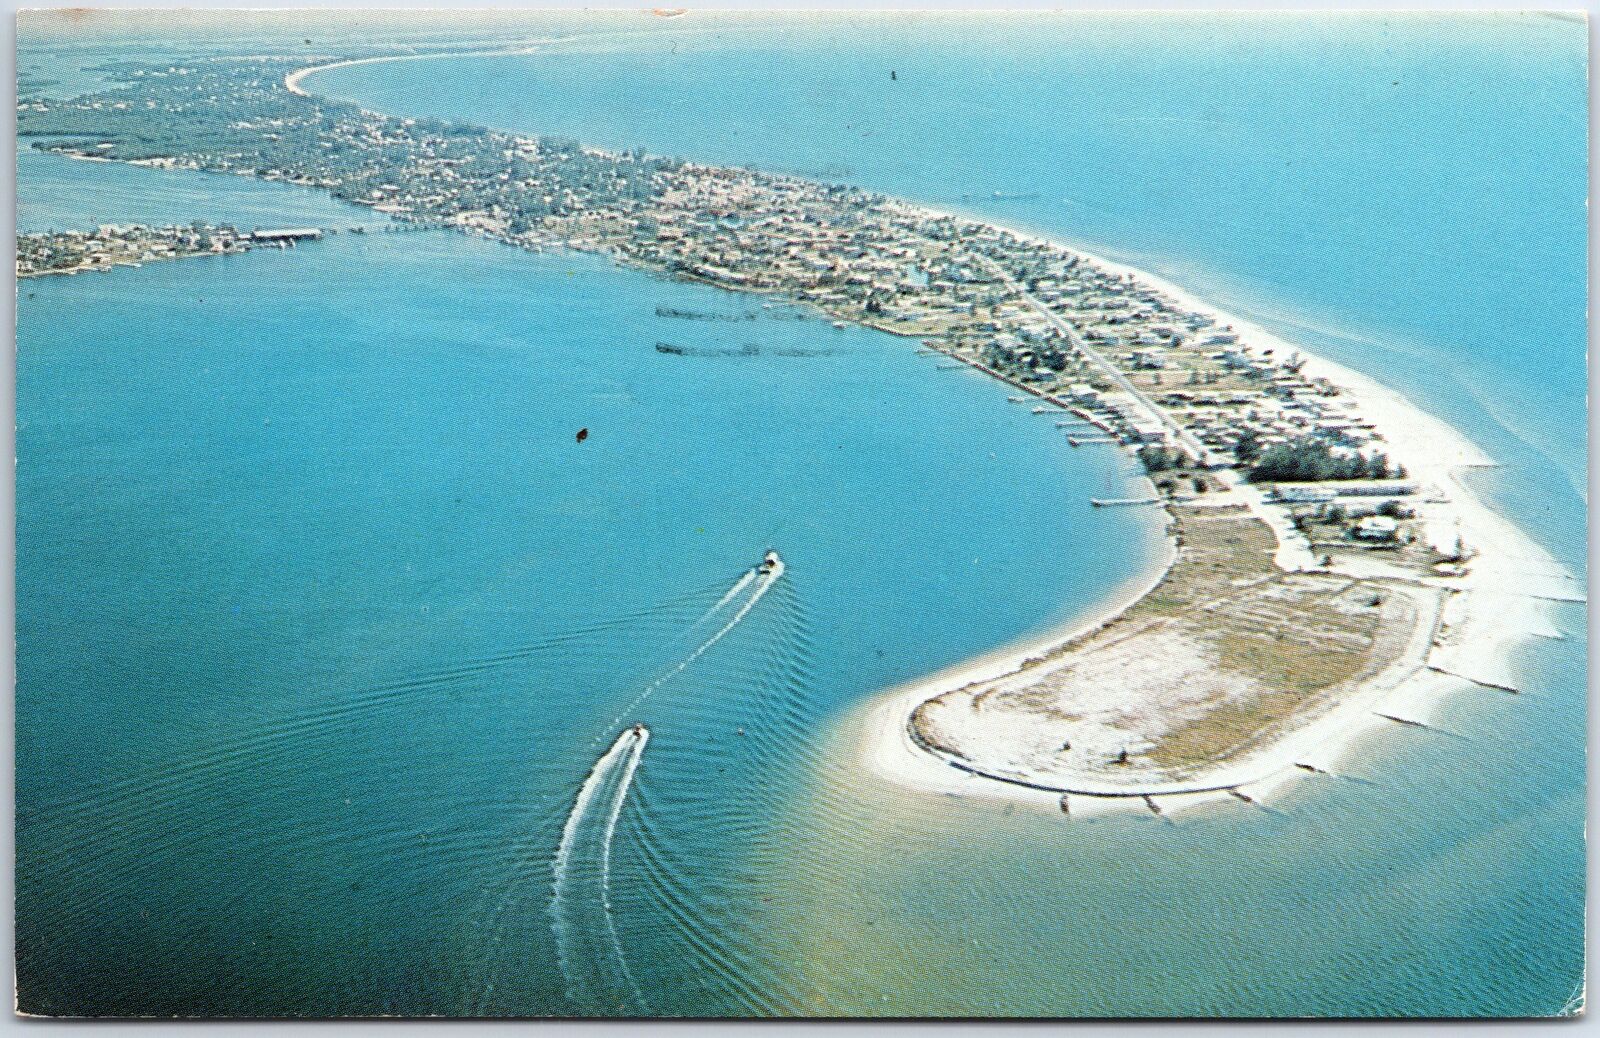 VINTAGE POSTCARD AERIAL VIEW OF THE CALOOSAHATCHEE RIVER FORT MYERS FLORIDA 1964